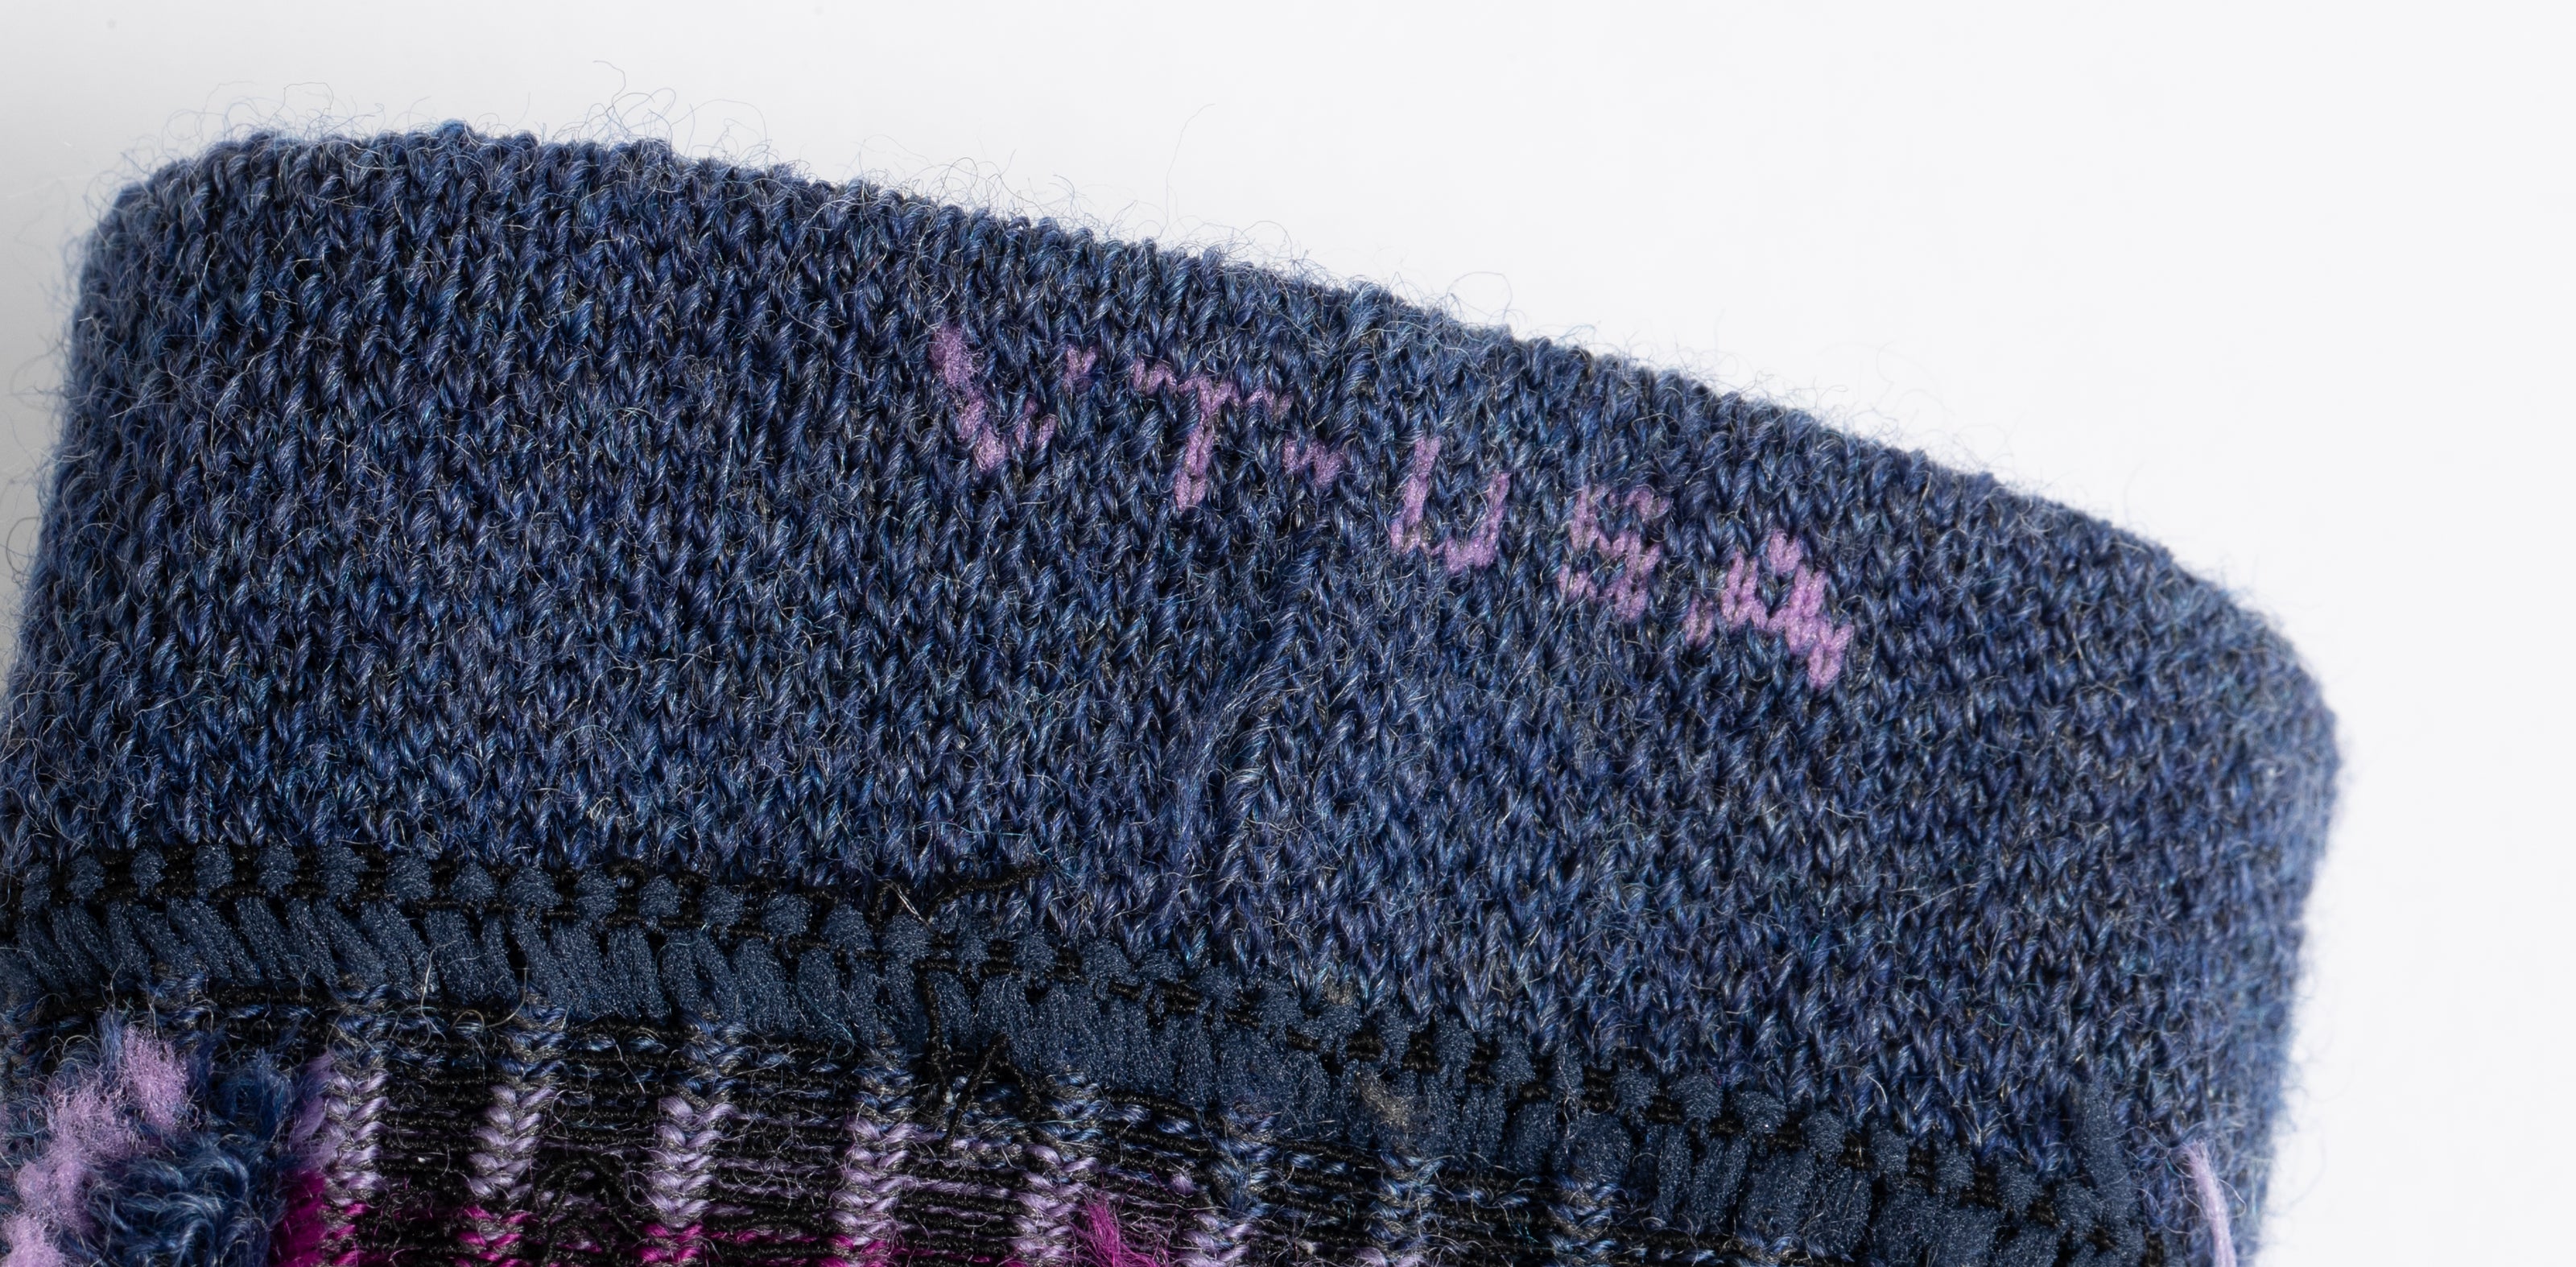 The inside of a sock with VT-USA knit into the cuff.